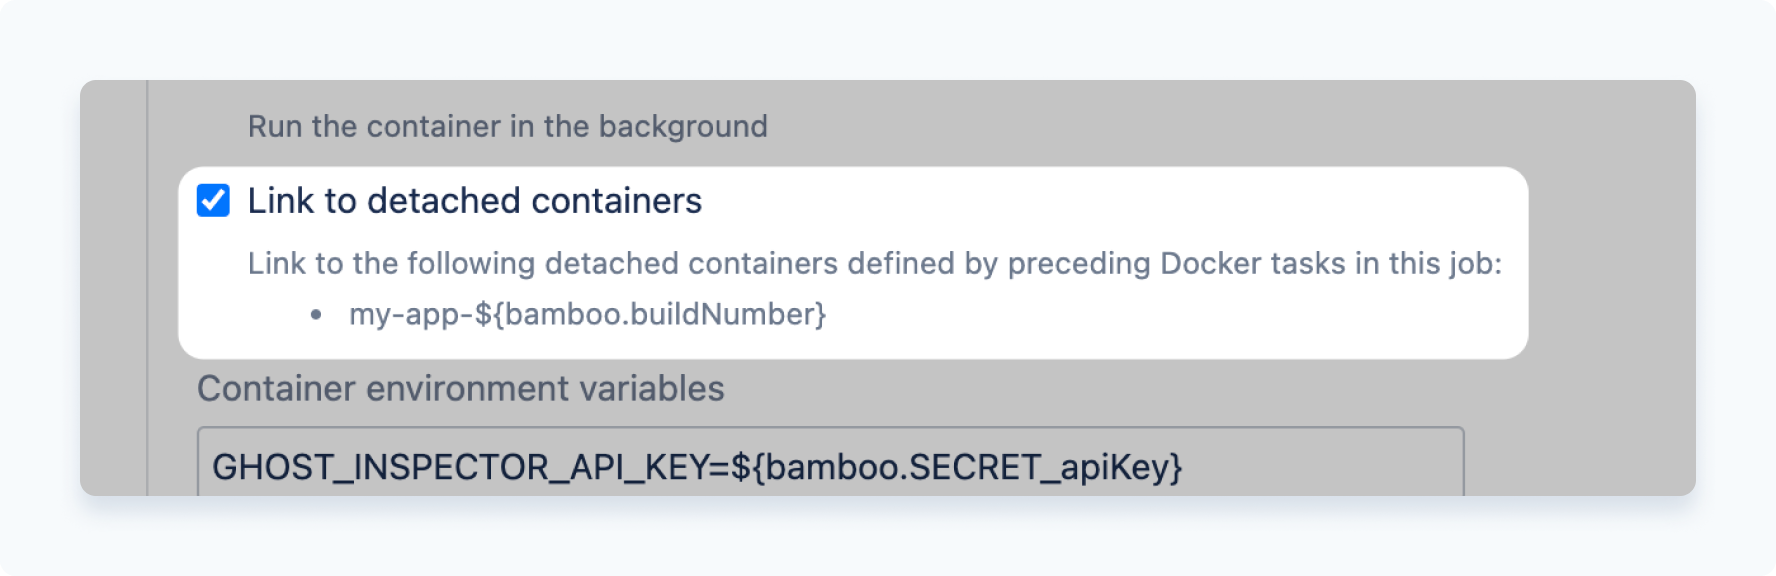 Select link to detached containers